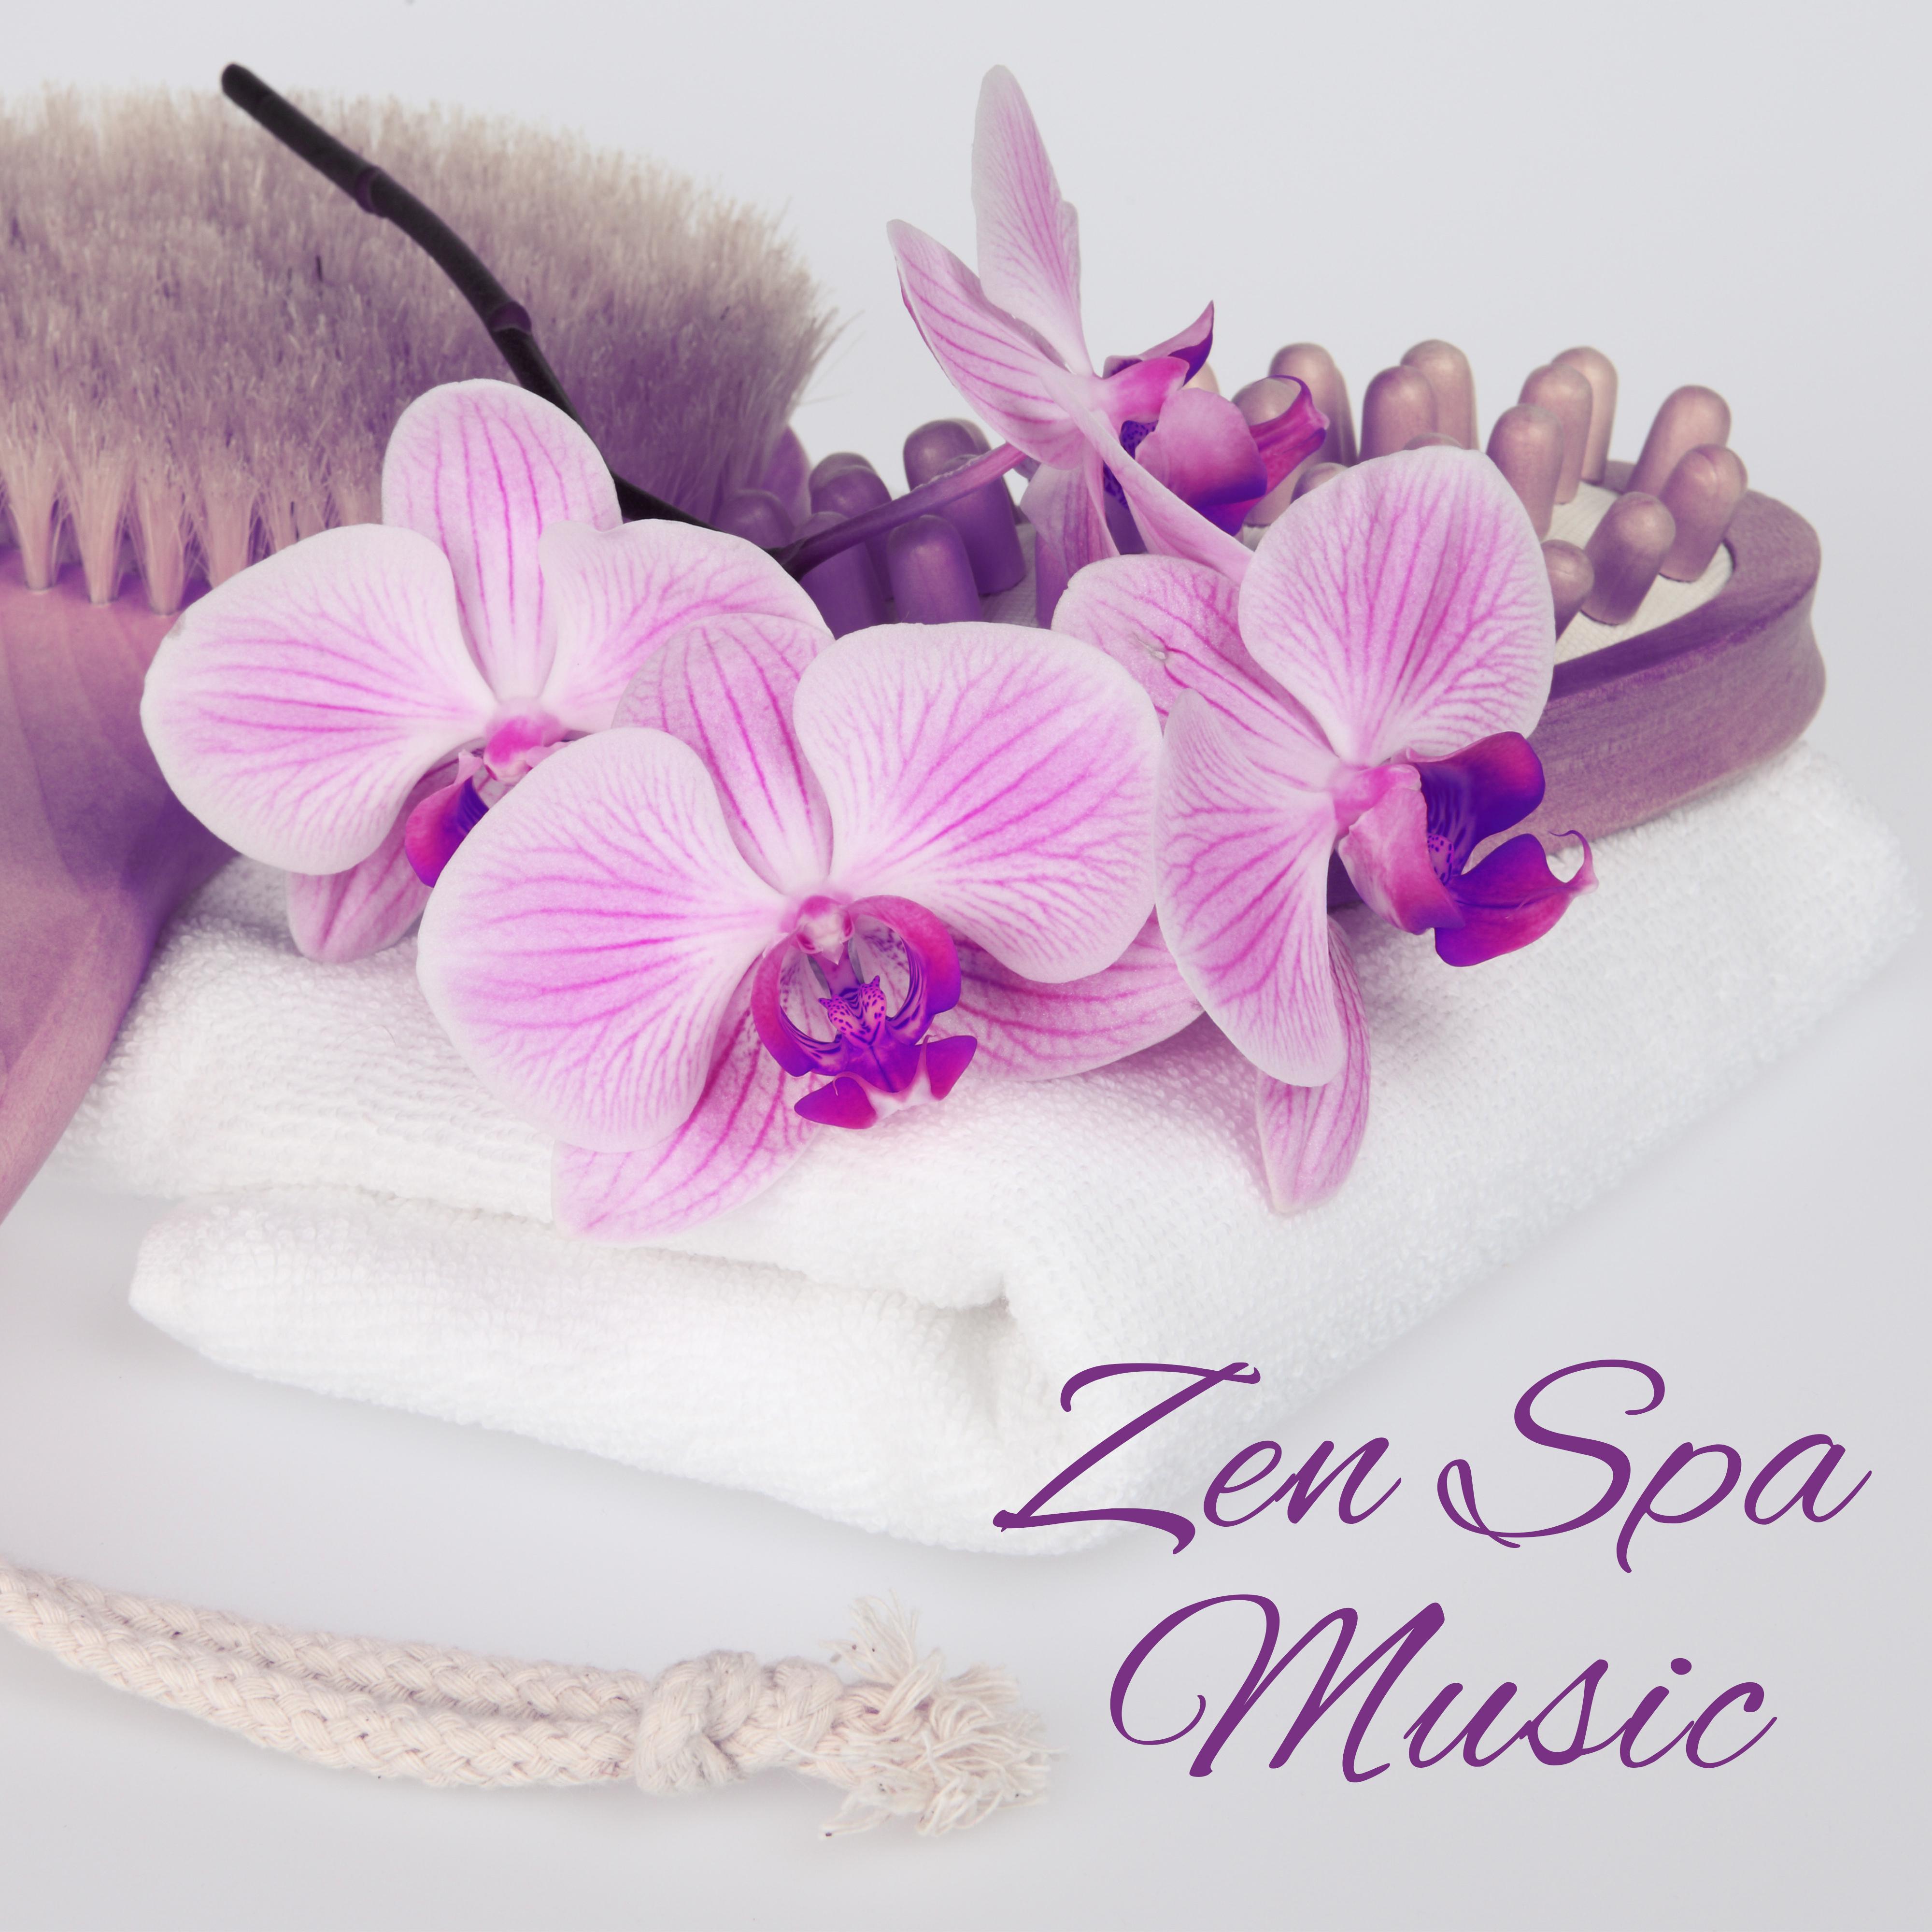 Zen Spa Music  Peaceful Sounds for Deep Relief, Relaxation Wellness, Healing Body, Deep Massage, Nature Sounds, Relaxing Therapy for Pure Mind, Spa Music